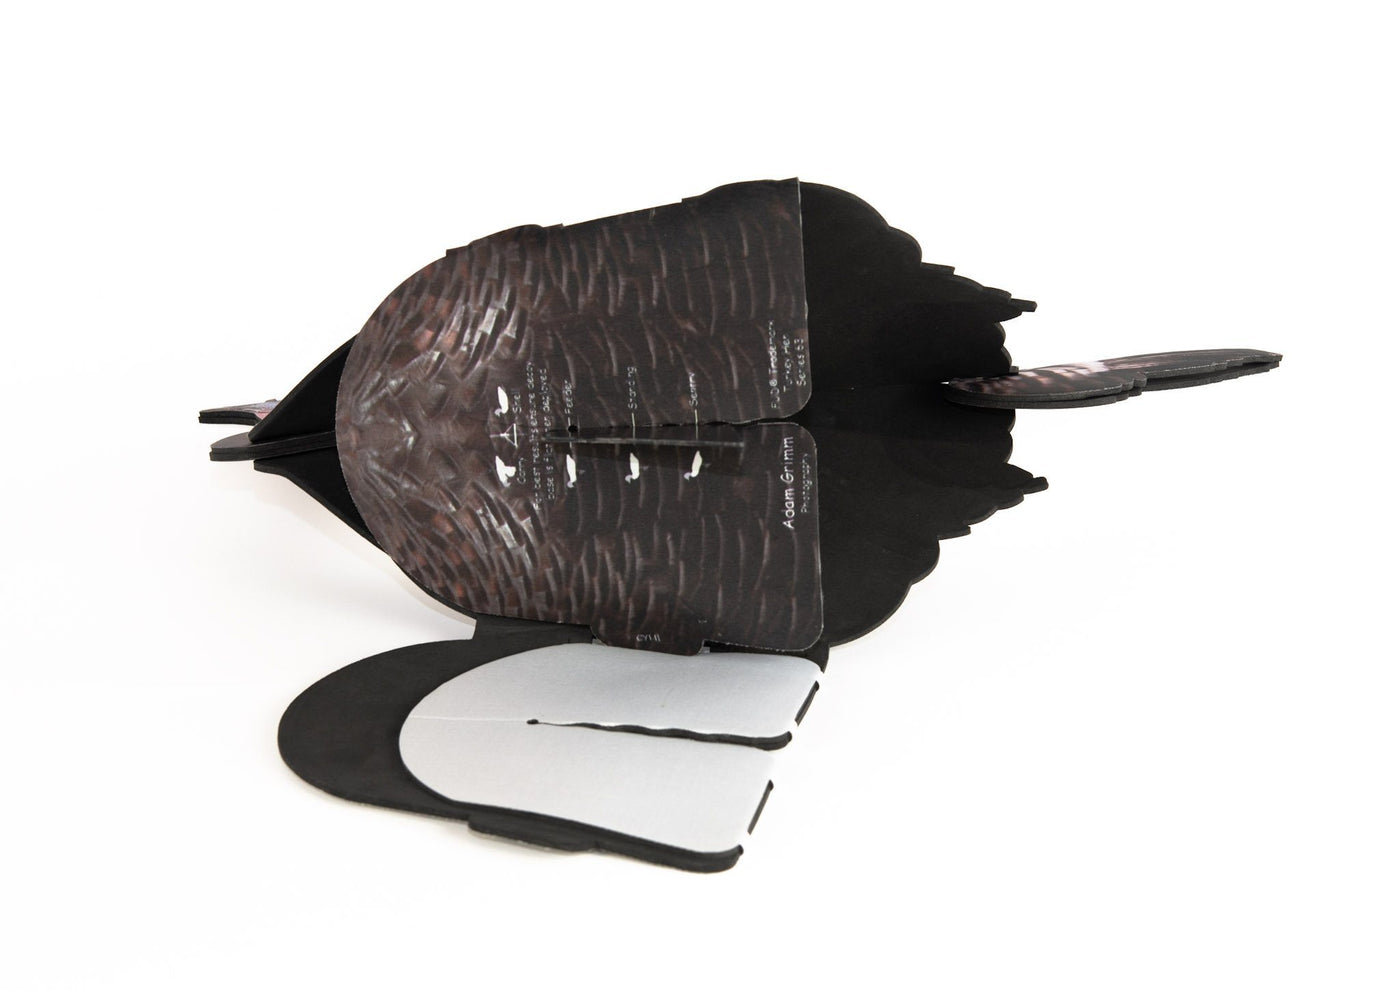 Turkey Decoy –  Foldable and Collapsible Full Body Decoys (6 Decoys) - Fold Up Decoy